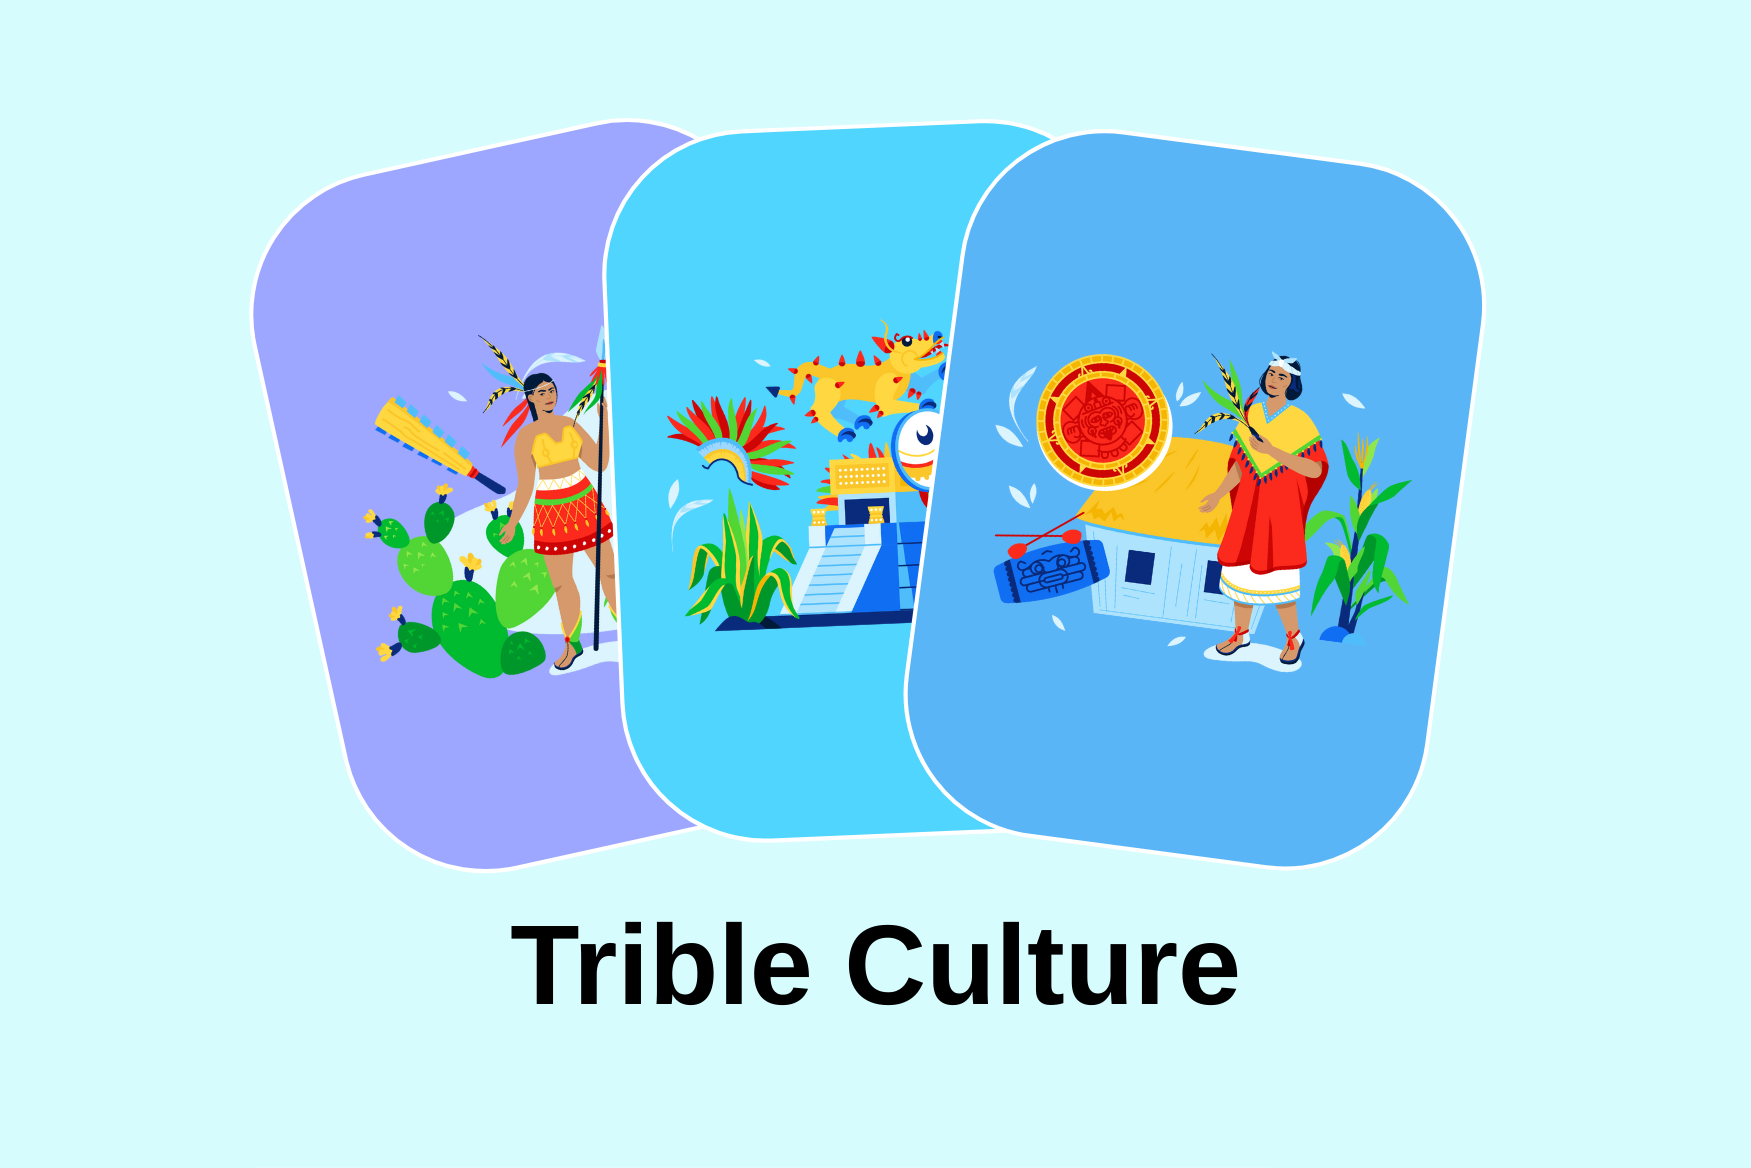 Premium Trible Culture Illustration Pack From People Illustrations